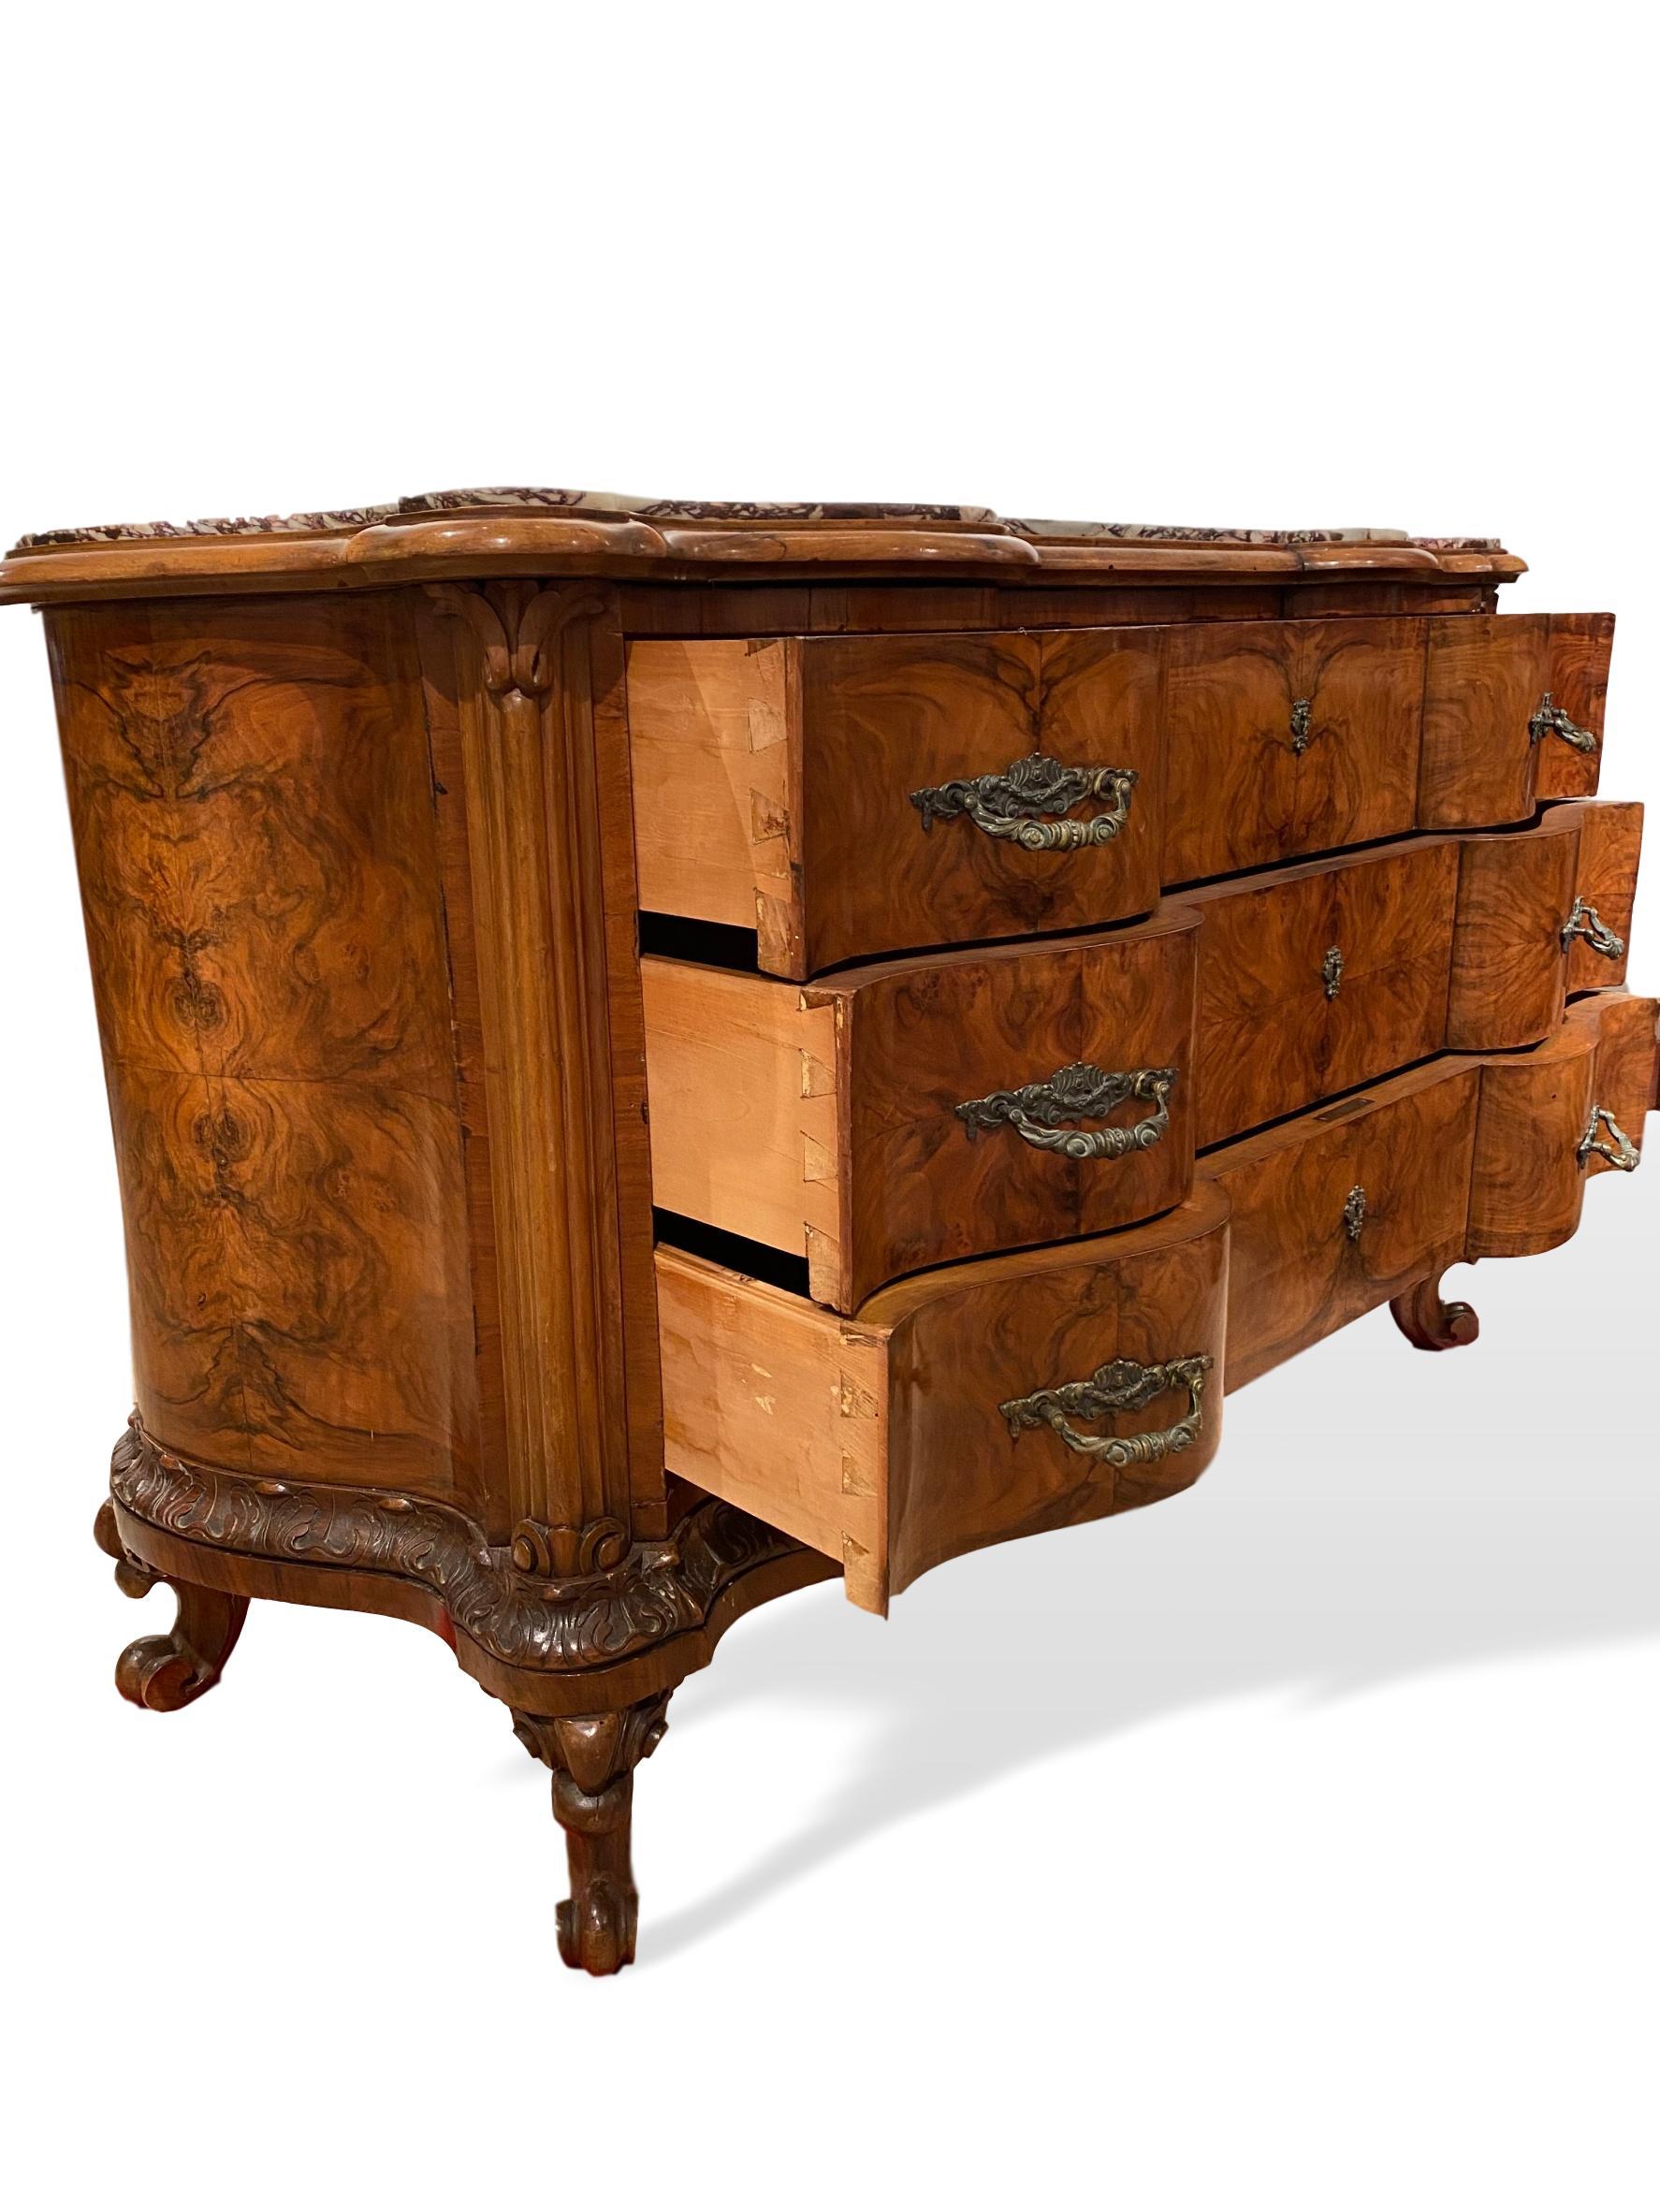 Walnut marble-top serpentine commode, Italian, circa 1880, with shaped marble top over three serpentine drawers, above a foliate carved apron, on elaborately carved whorl feet--all hand carved. The piece retains all of its original gilt bronze